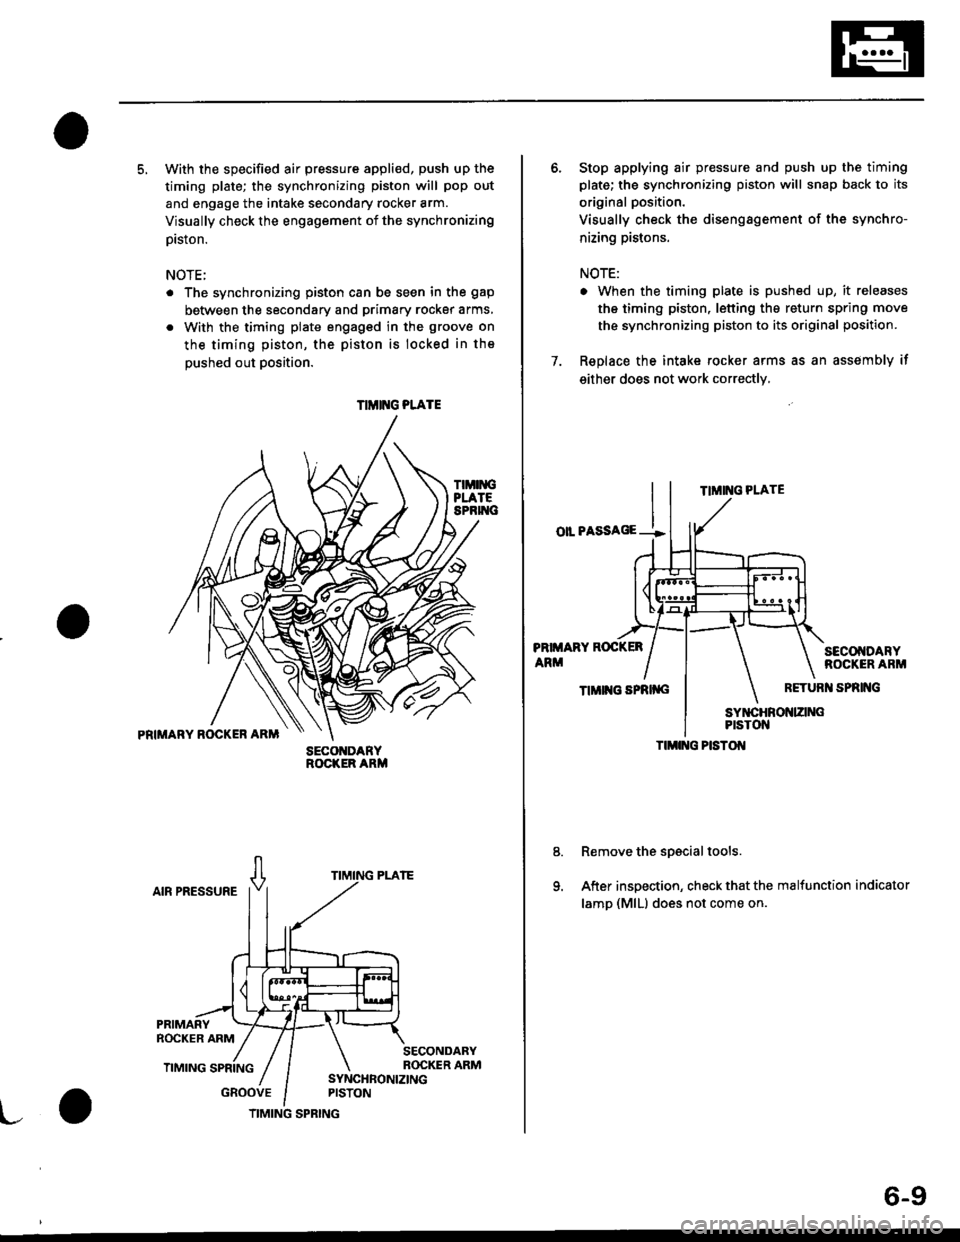 HONDA CIVIC 1996 6.G Workshop Manual 5. With the specified air pressure appli€d, push up the
timing plate; the synchronizing piston will pop out
and engage the intake secondary rocker arm.
Visually check the engagement of the synchroni